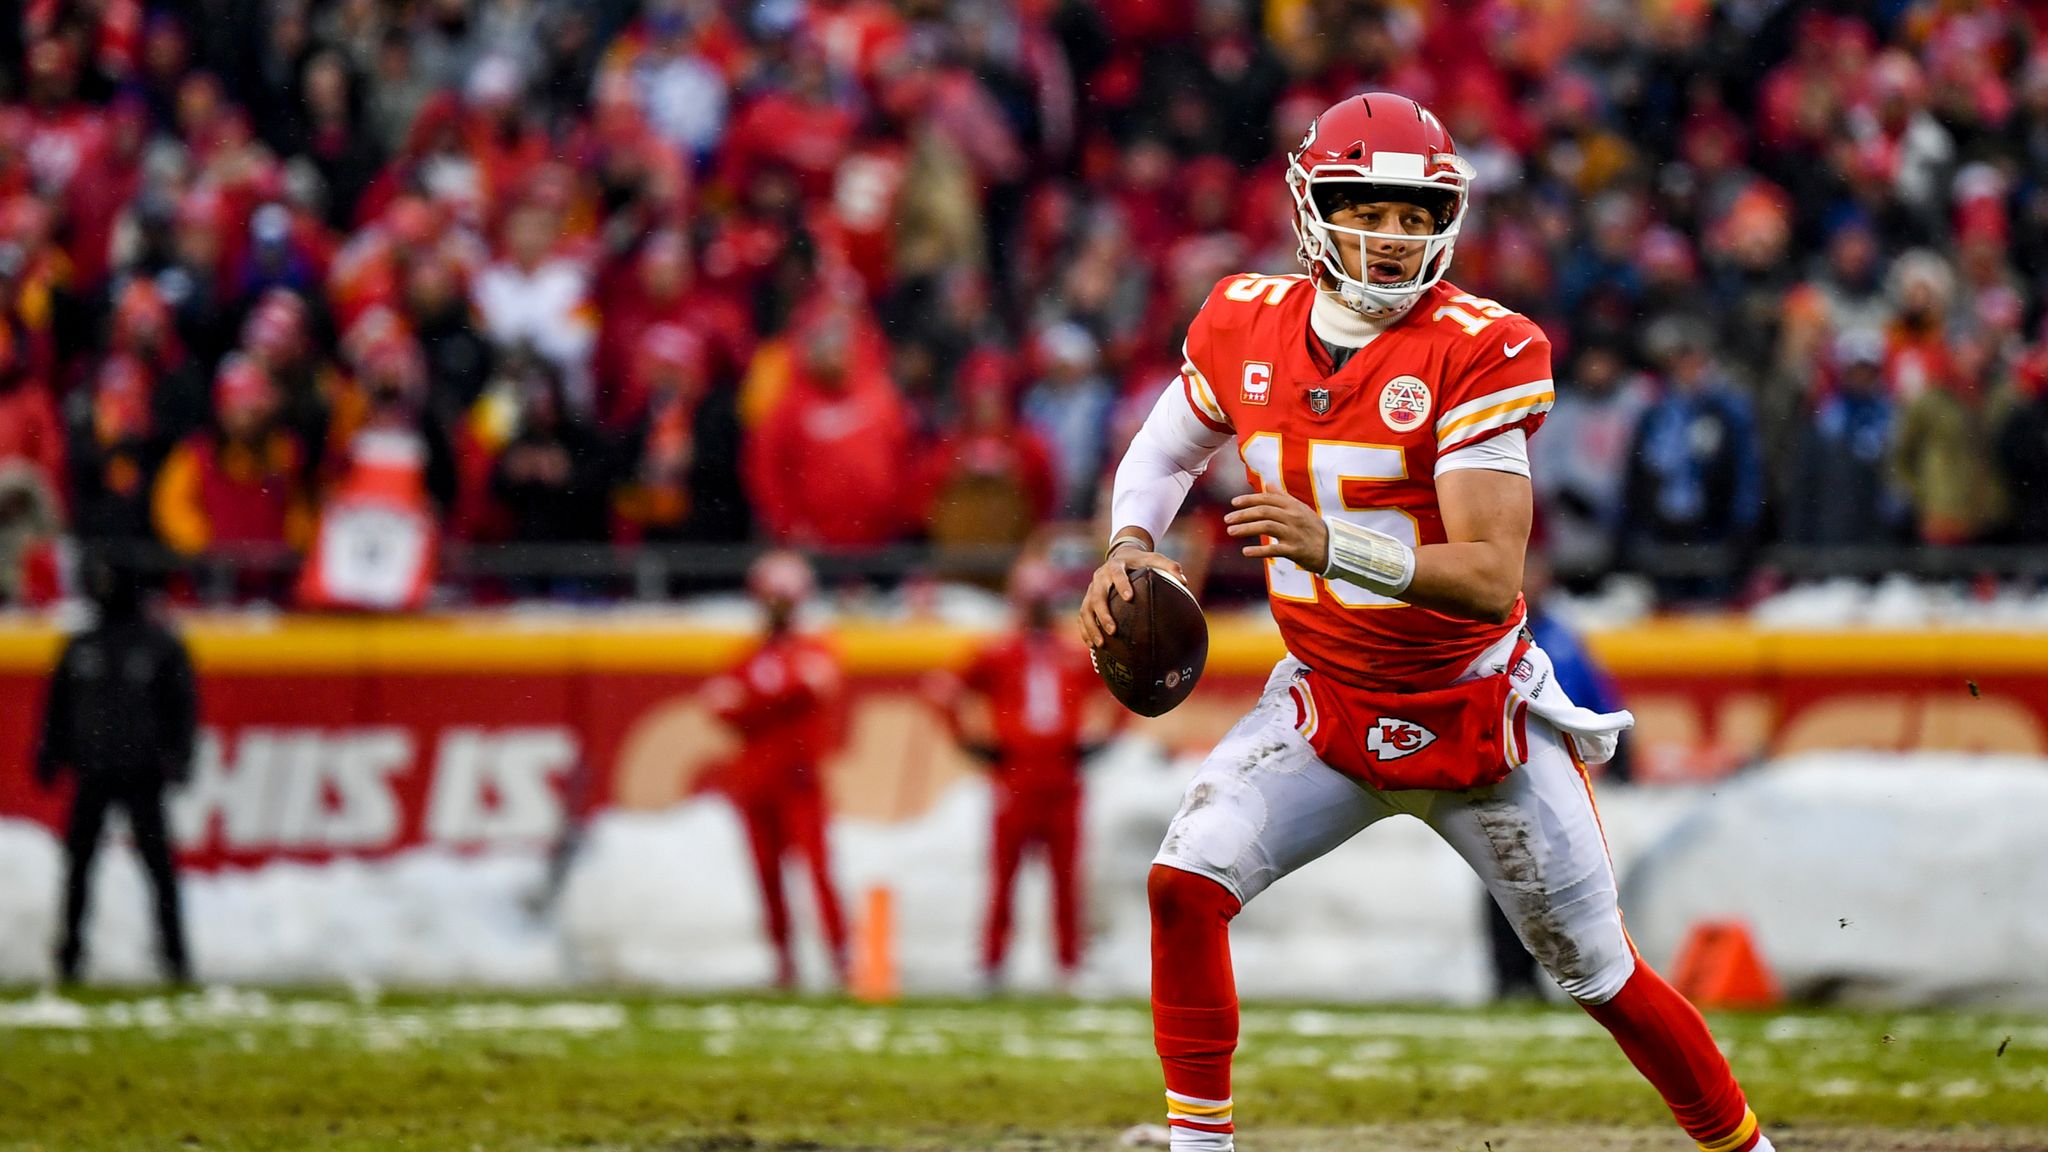 Indianapolis Colts 13-31 Kansas City Chiefs: Chiefs advance to